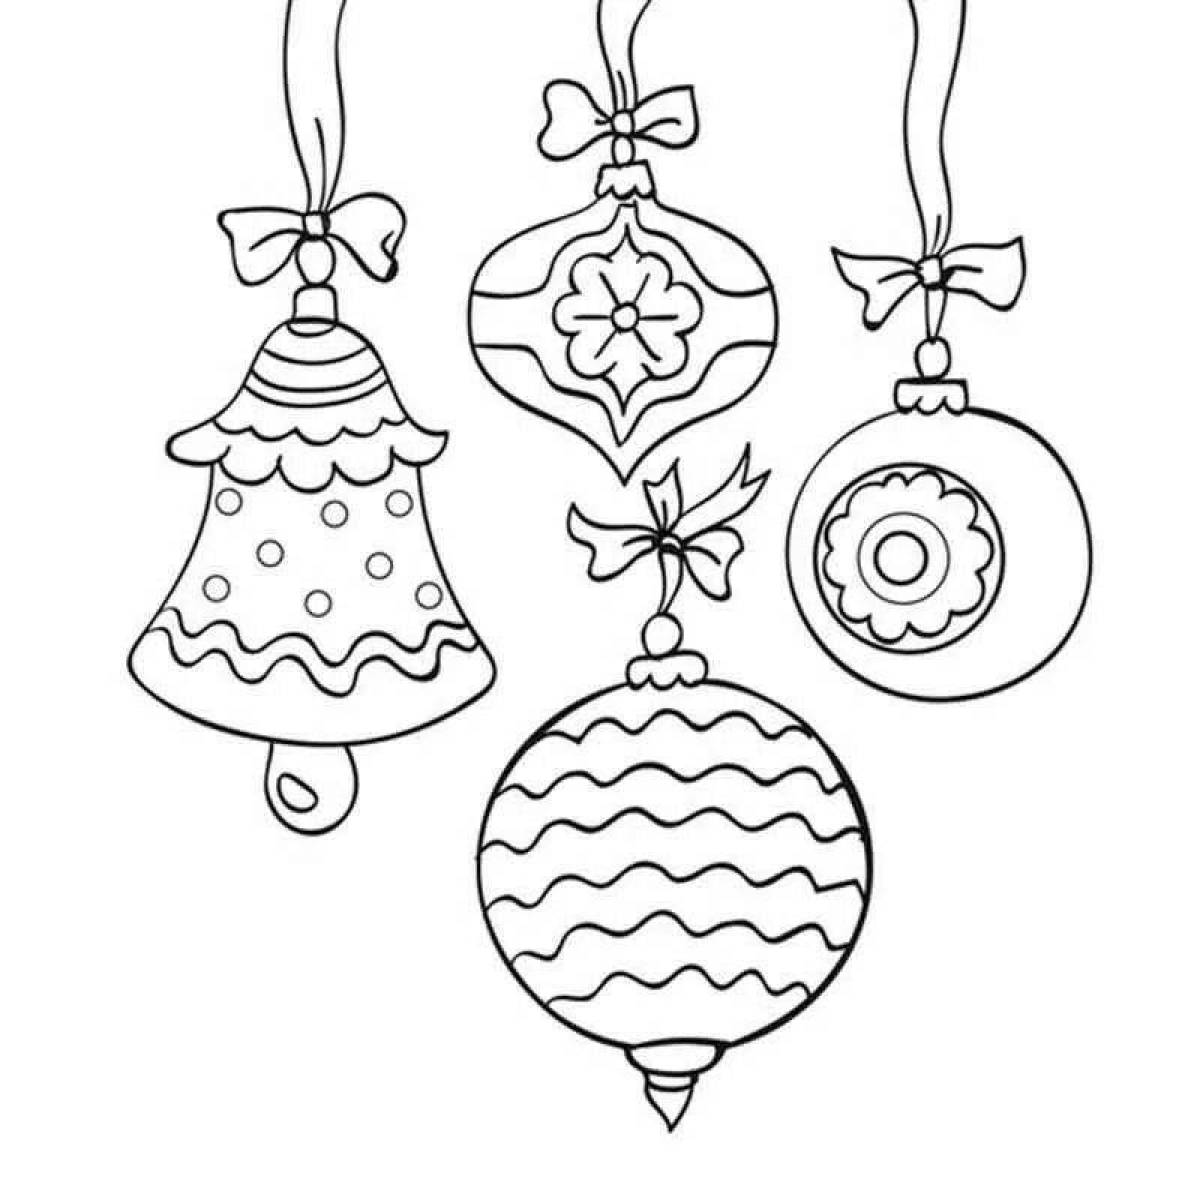 Coloring book magical Christmas decorations